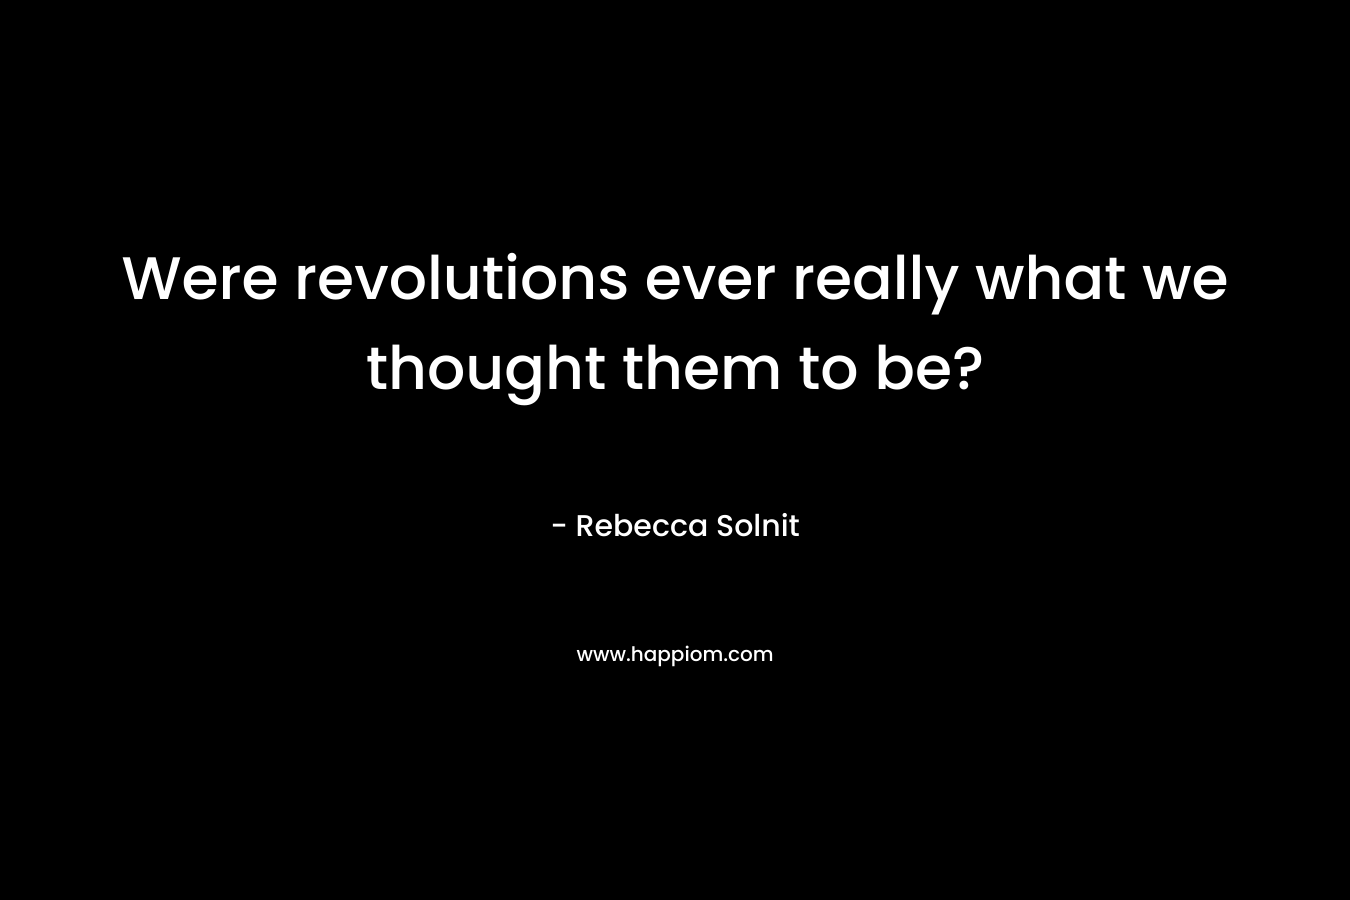 Were revolutions ever really what we thought them to be?